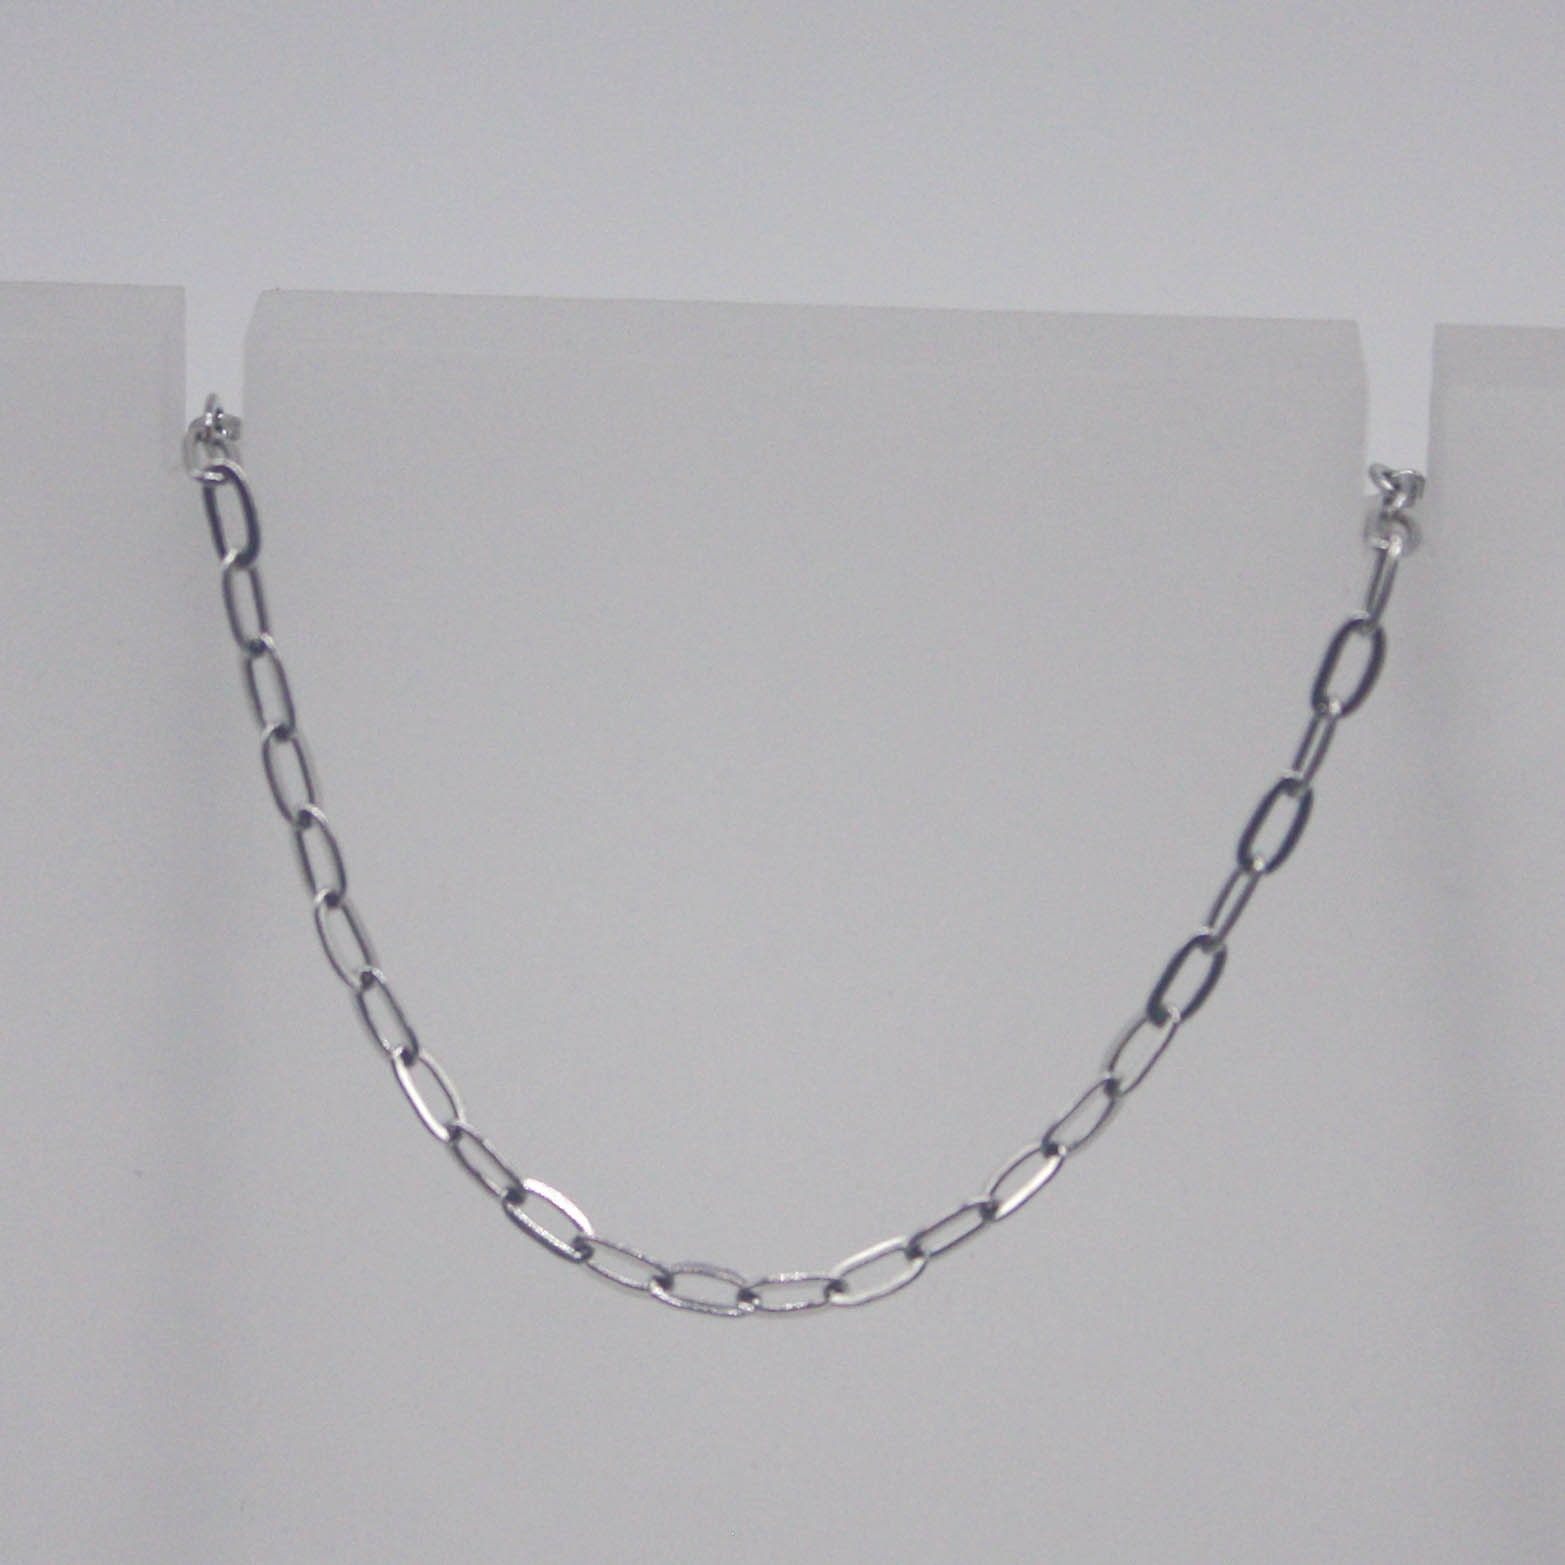 Stainless Steel Chain Bulk, 30 Ft of Surgical Stainless Steel Sturdy Chunky  Big Heavy Cable Chain 8x6mm 1.2mm 16G Unsoldered Link ST86S 